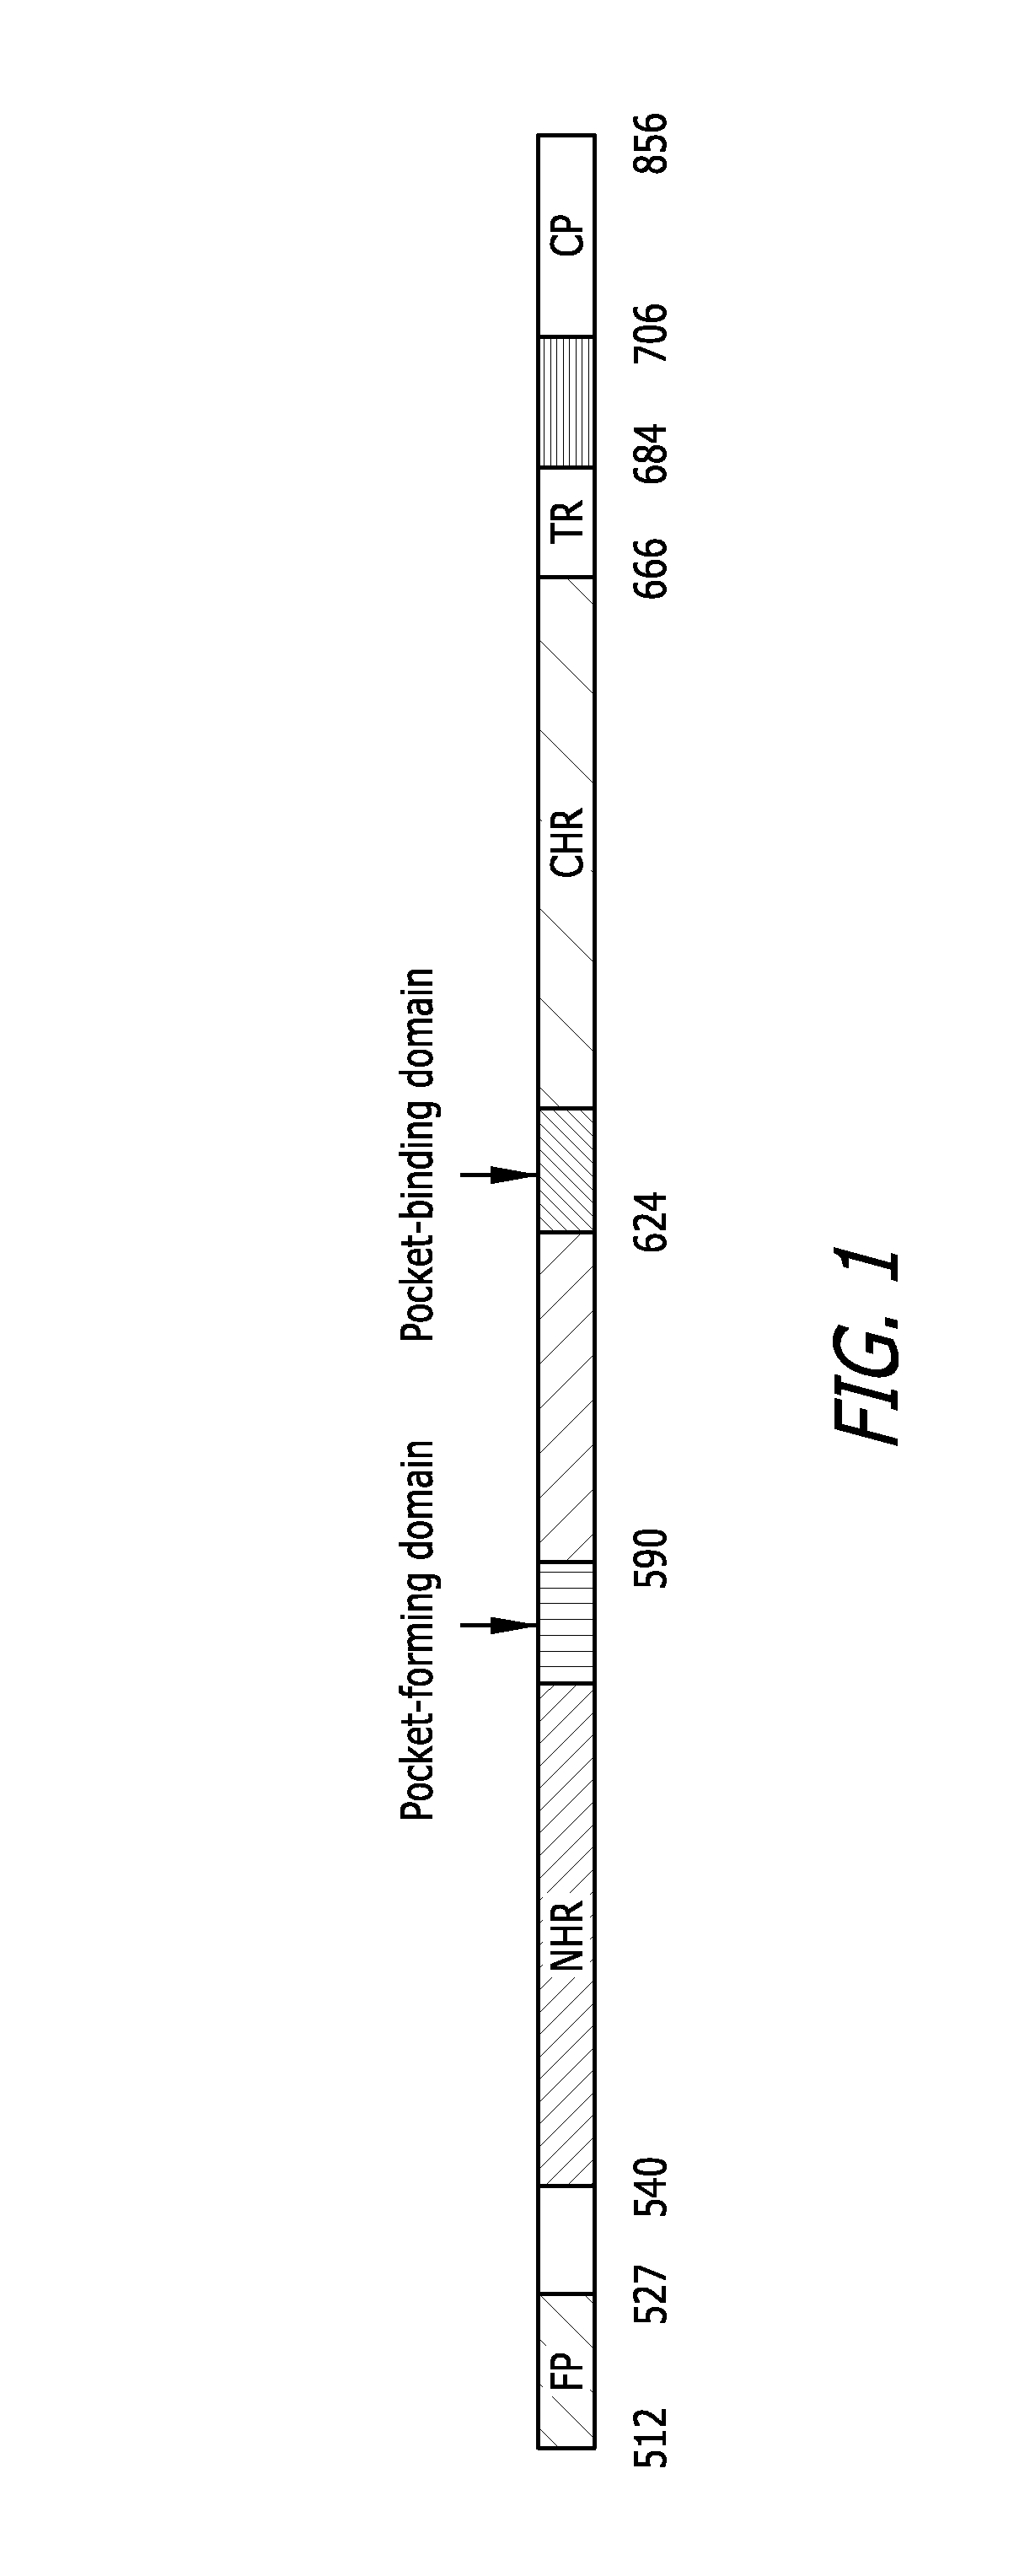 Trimeric HIV fusion inhibitors for treating or preventing HIV infection